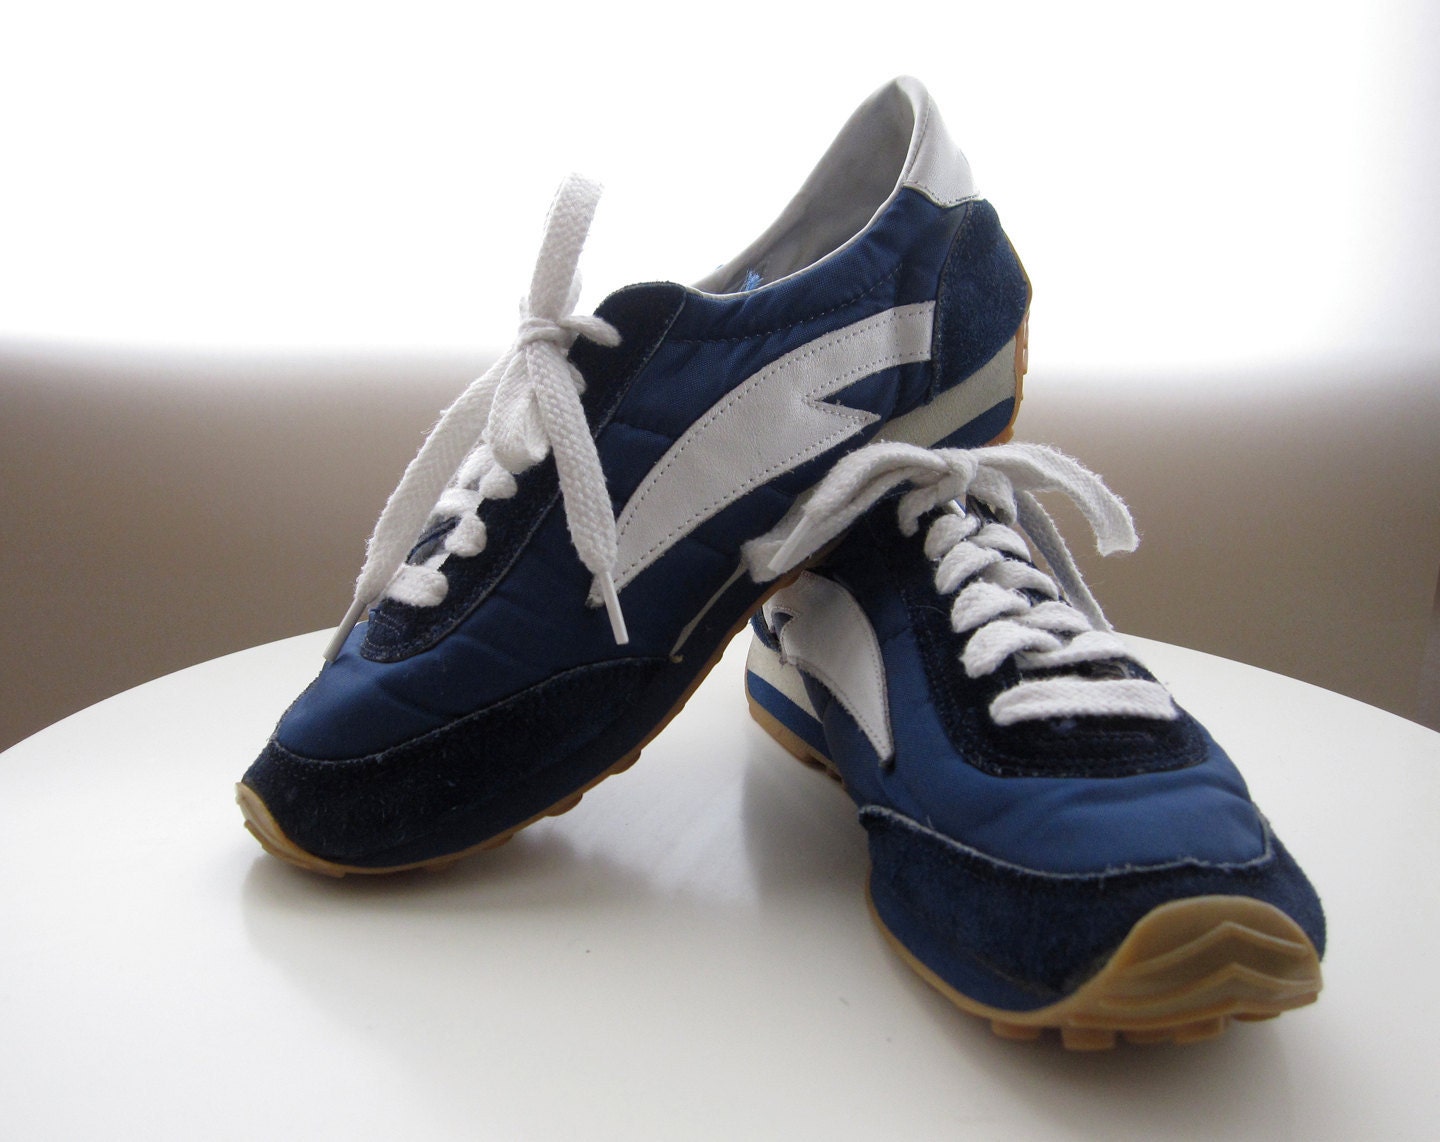 Amazing DEADSTOCK 80s sneakers by Norsport sz. 7.5